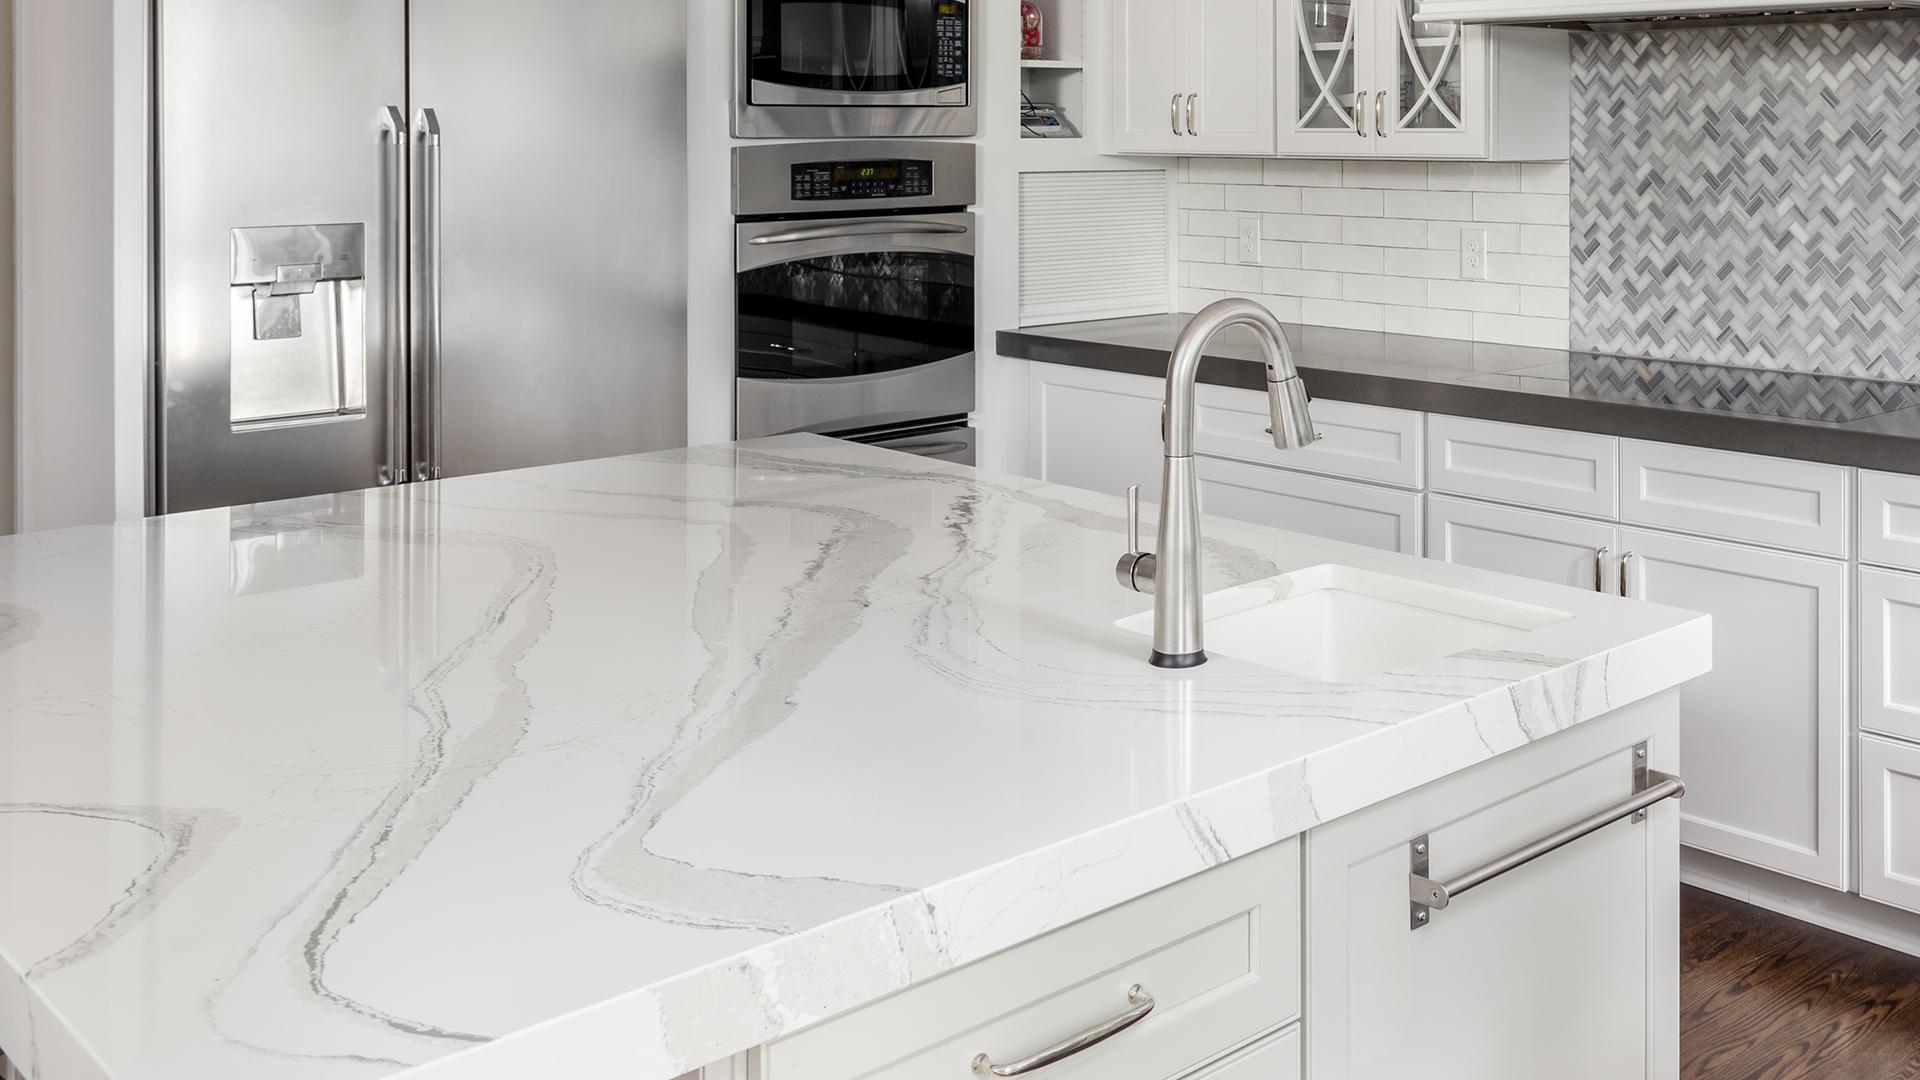 Diy Faux Marble Countertops Rachael Ray Show